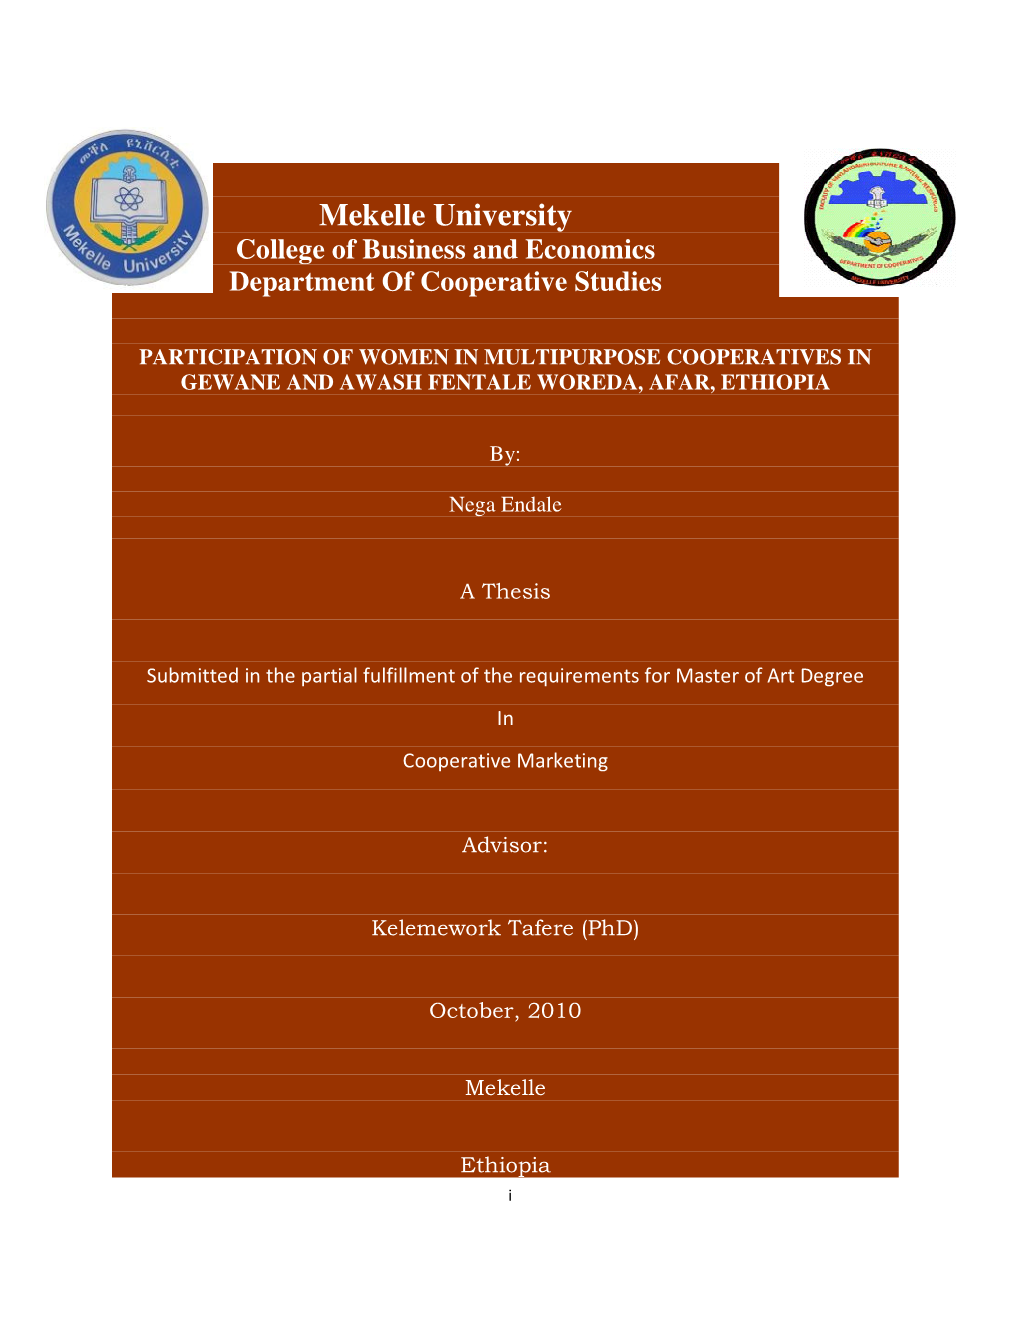 Abstract Participation of Women in Multipurpose Cooperatives in Gewane and Awash Fentale Woreda, Afar, Ethiopia